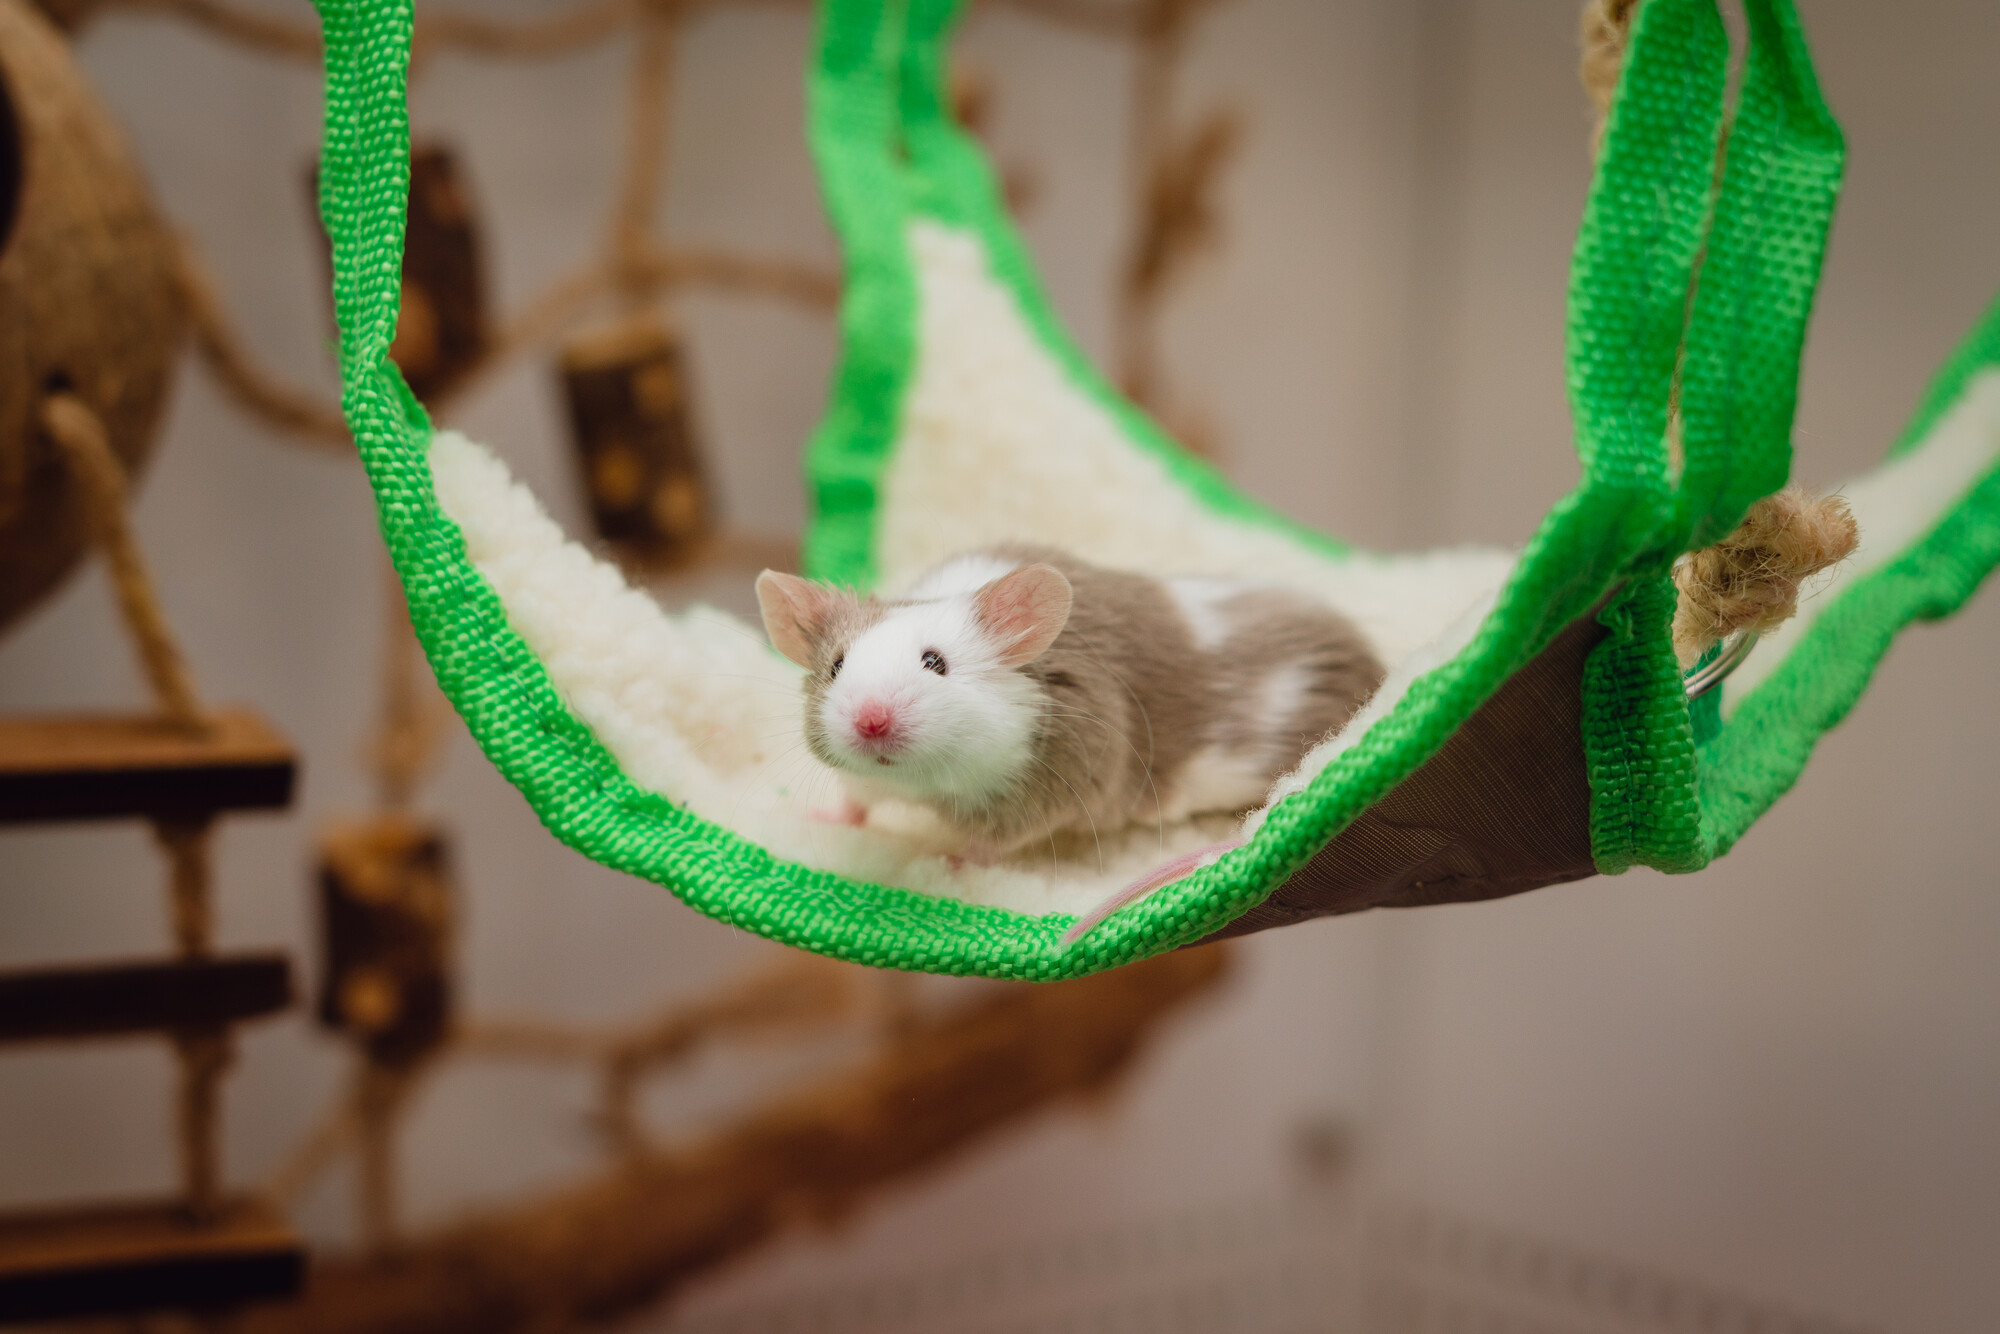 A white and brown mouse sits on a green hammock in their accommodation.